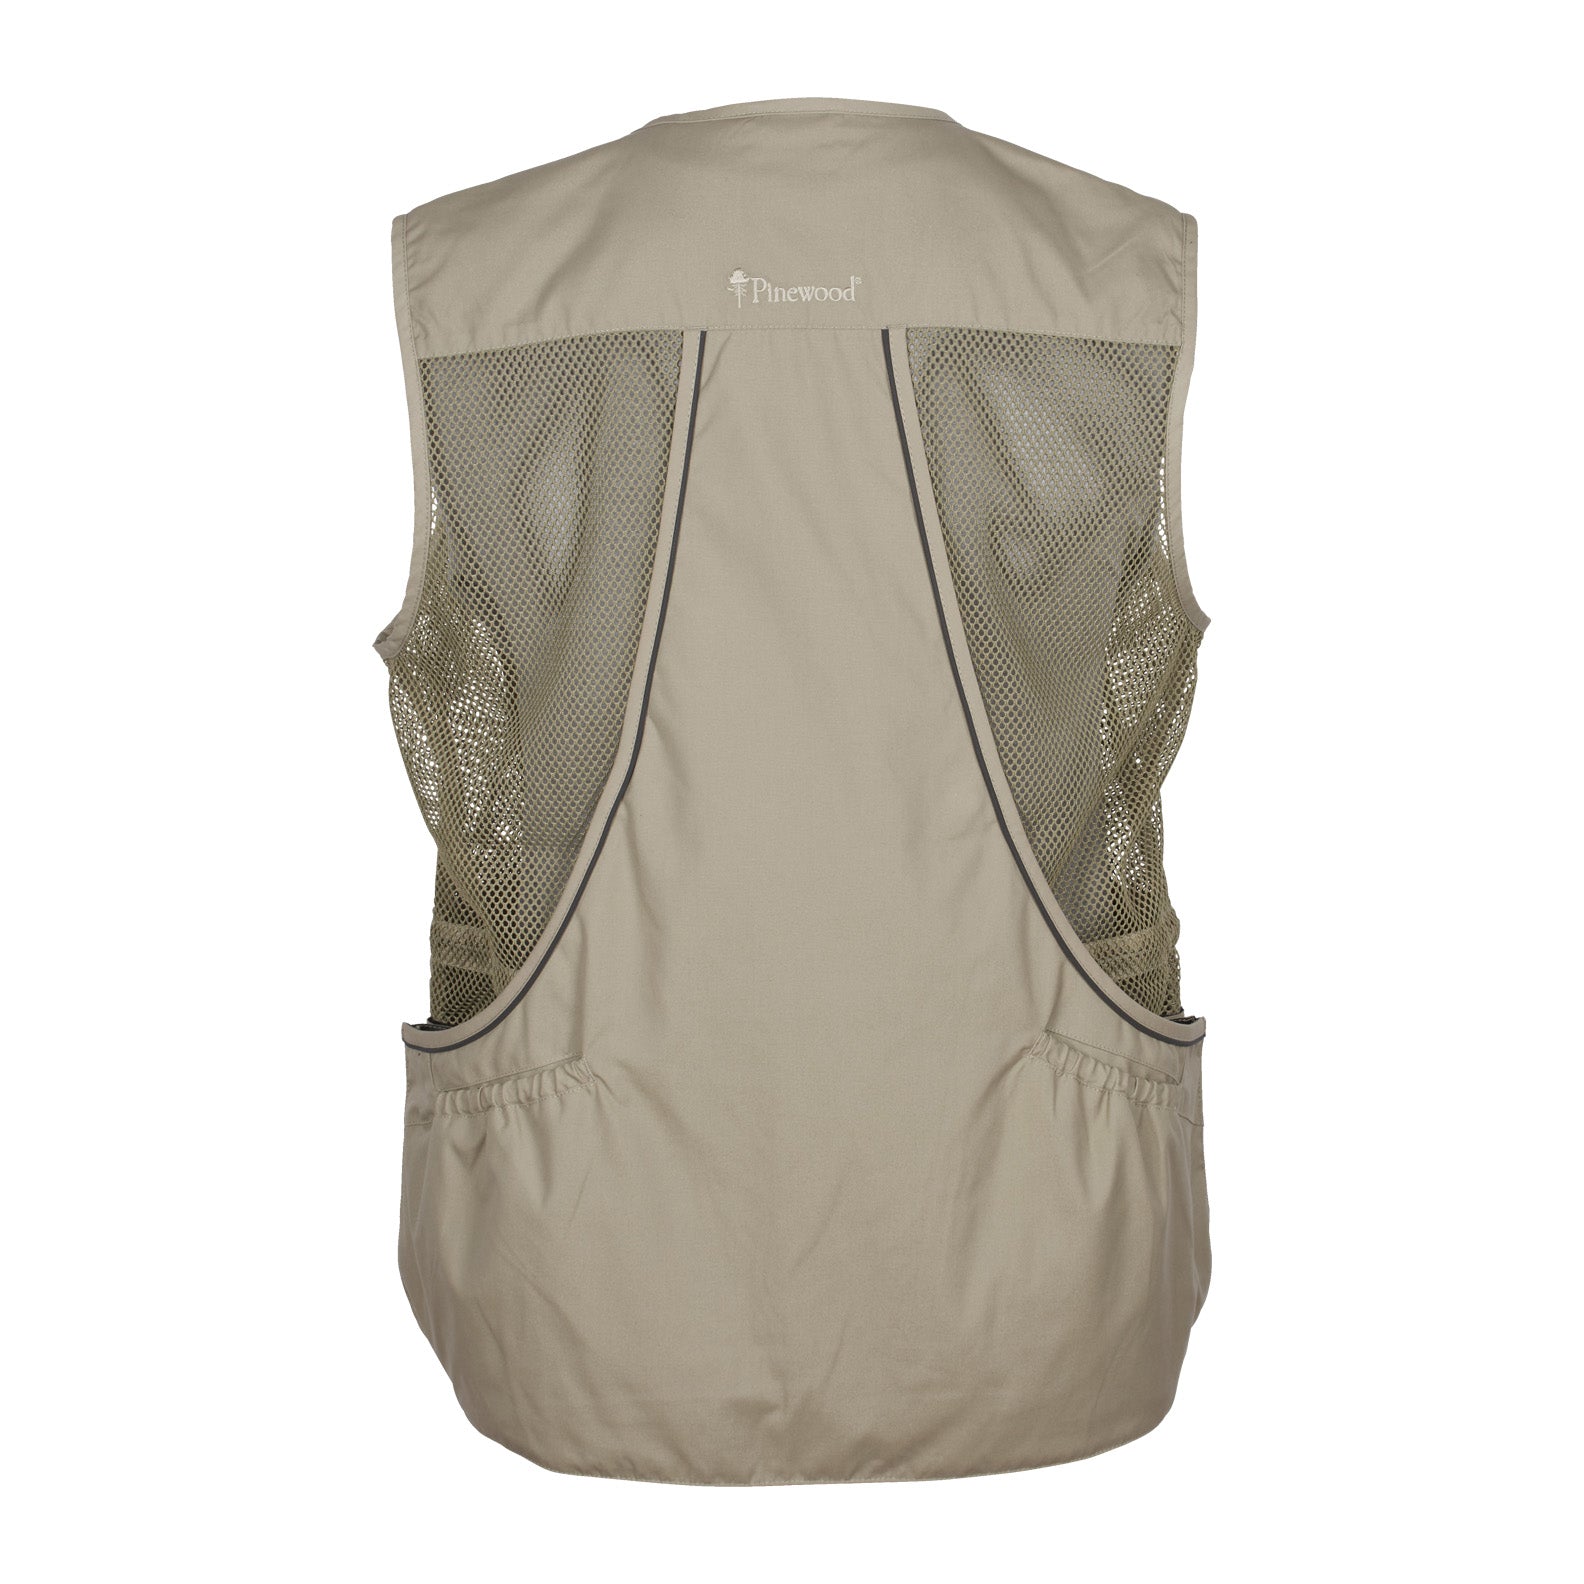 Pinewood Sports Vest 2.0 | Pinewood – New Forest Clothing